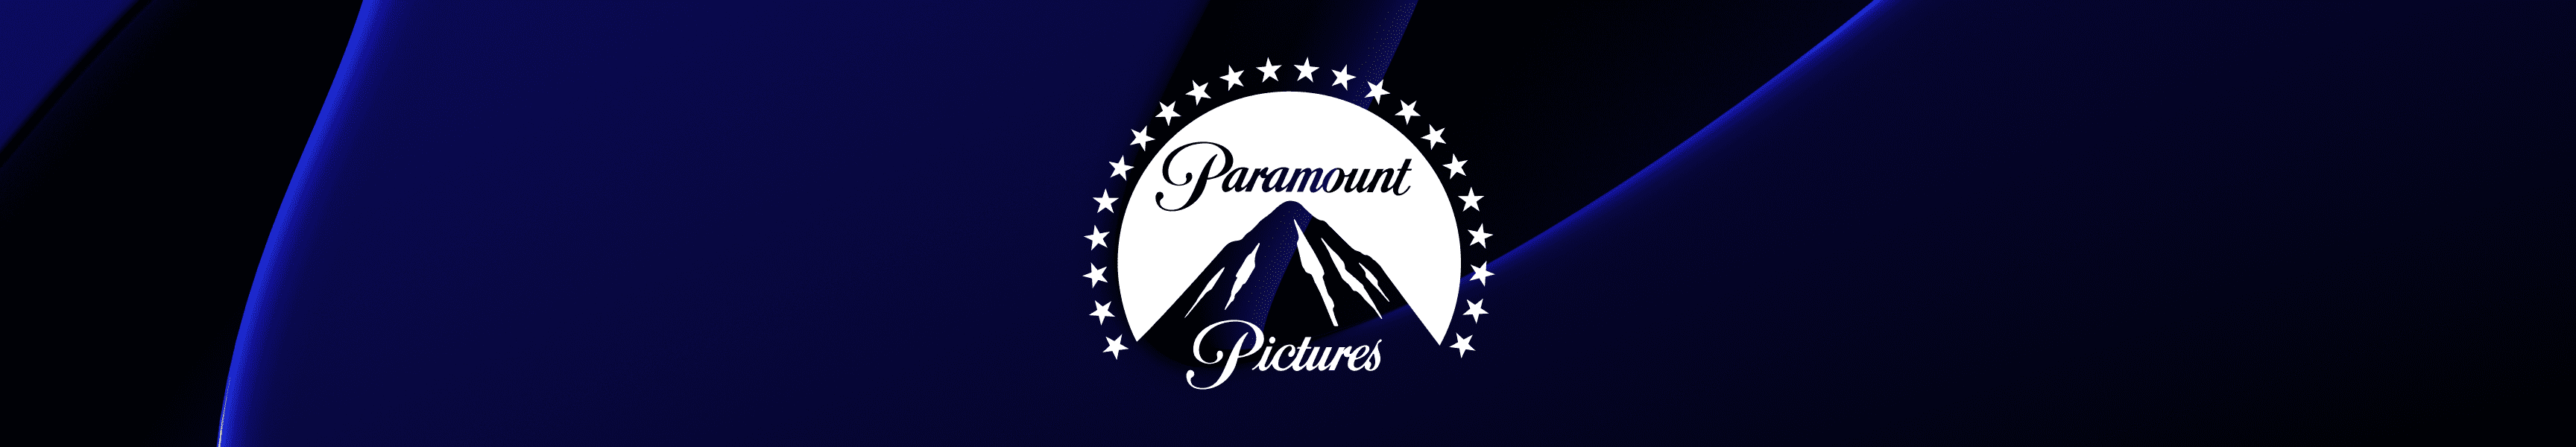 Paramount Pictures Bar Accessories